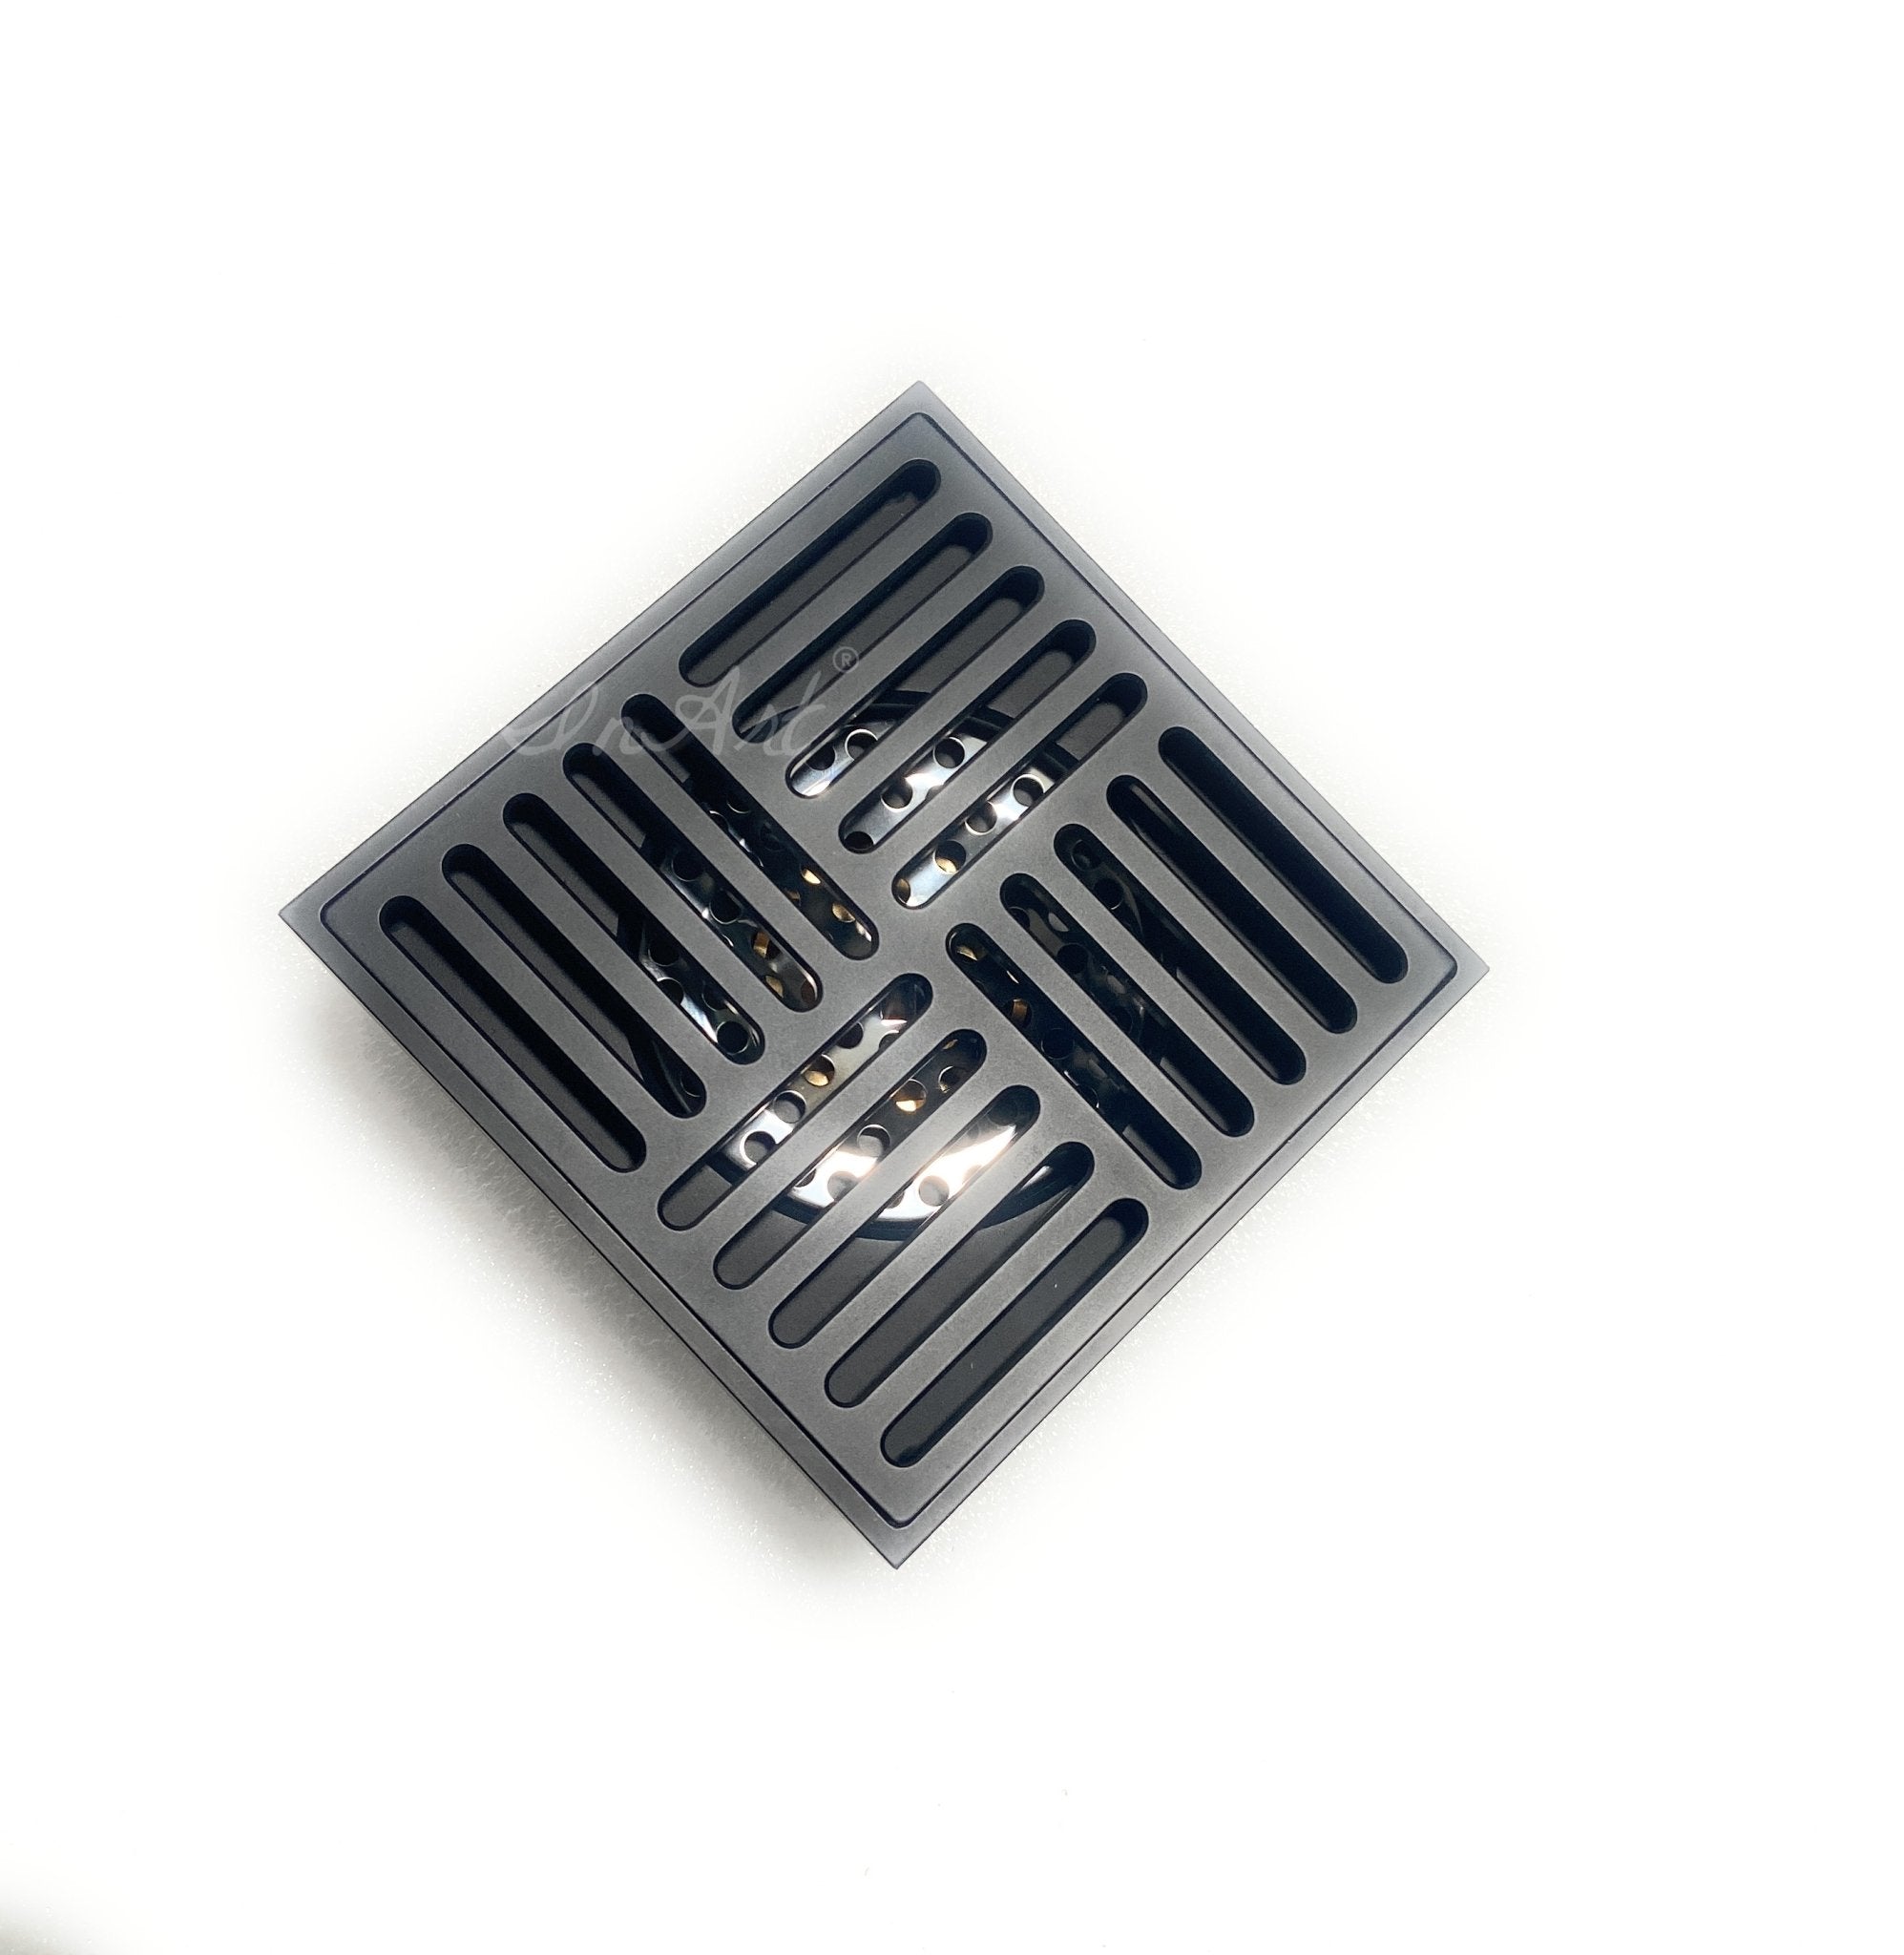 http://inart-in.com/cdn/shop/products/inart-brass-square-shower-floor-drain-with-removable-cover-grid-grate-5-inch-long-black-matt-color-stripes-pattern-inart-studio-usa-807211.jpg?v=1663697016